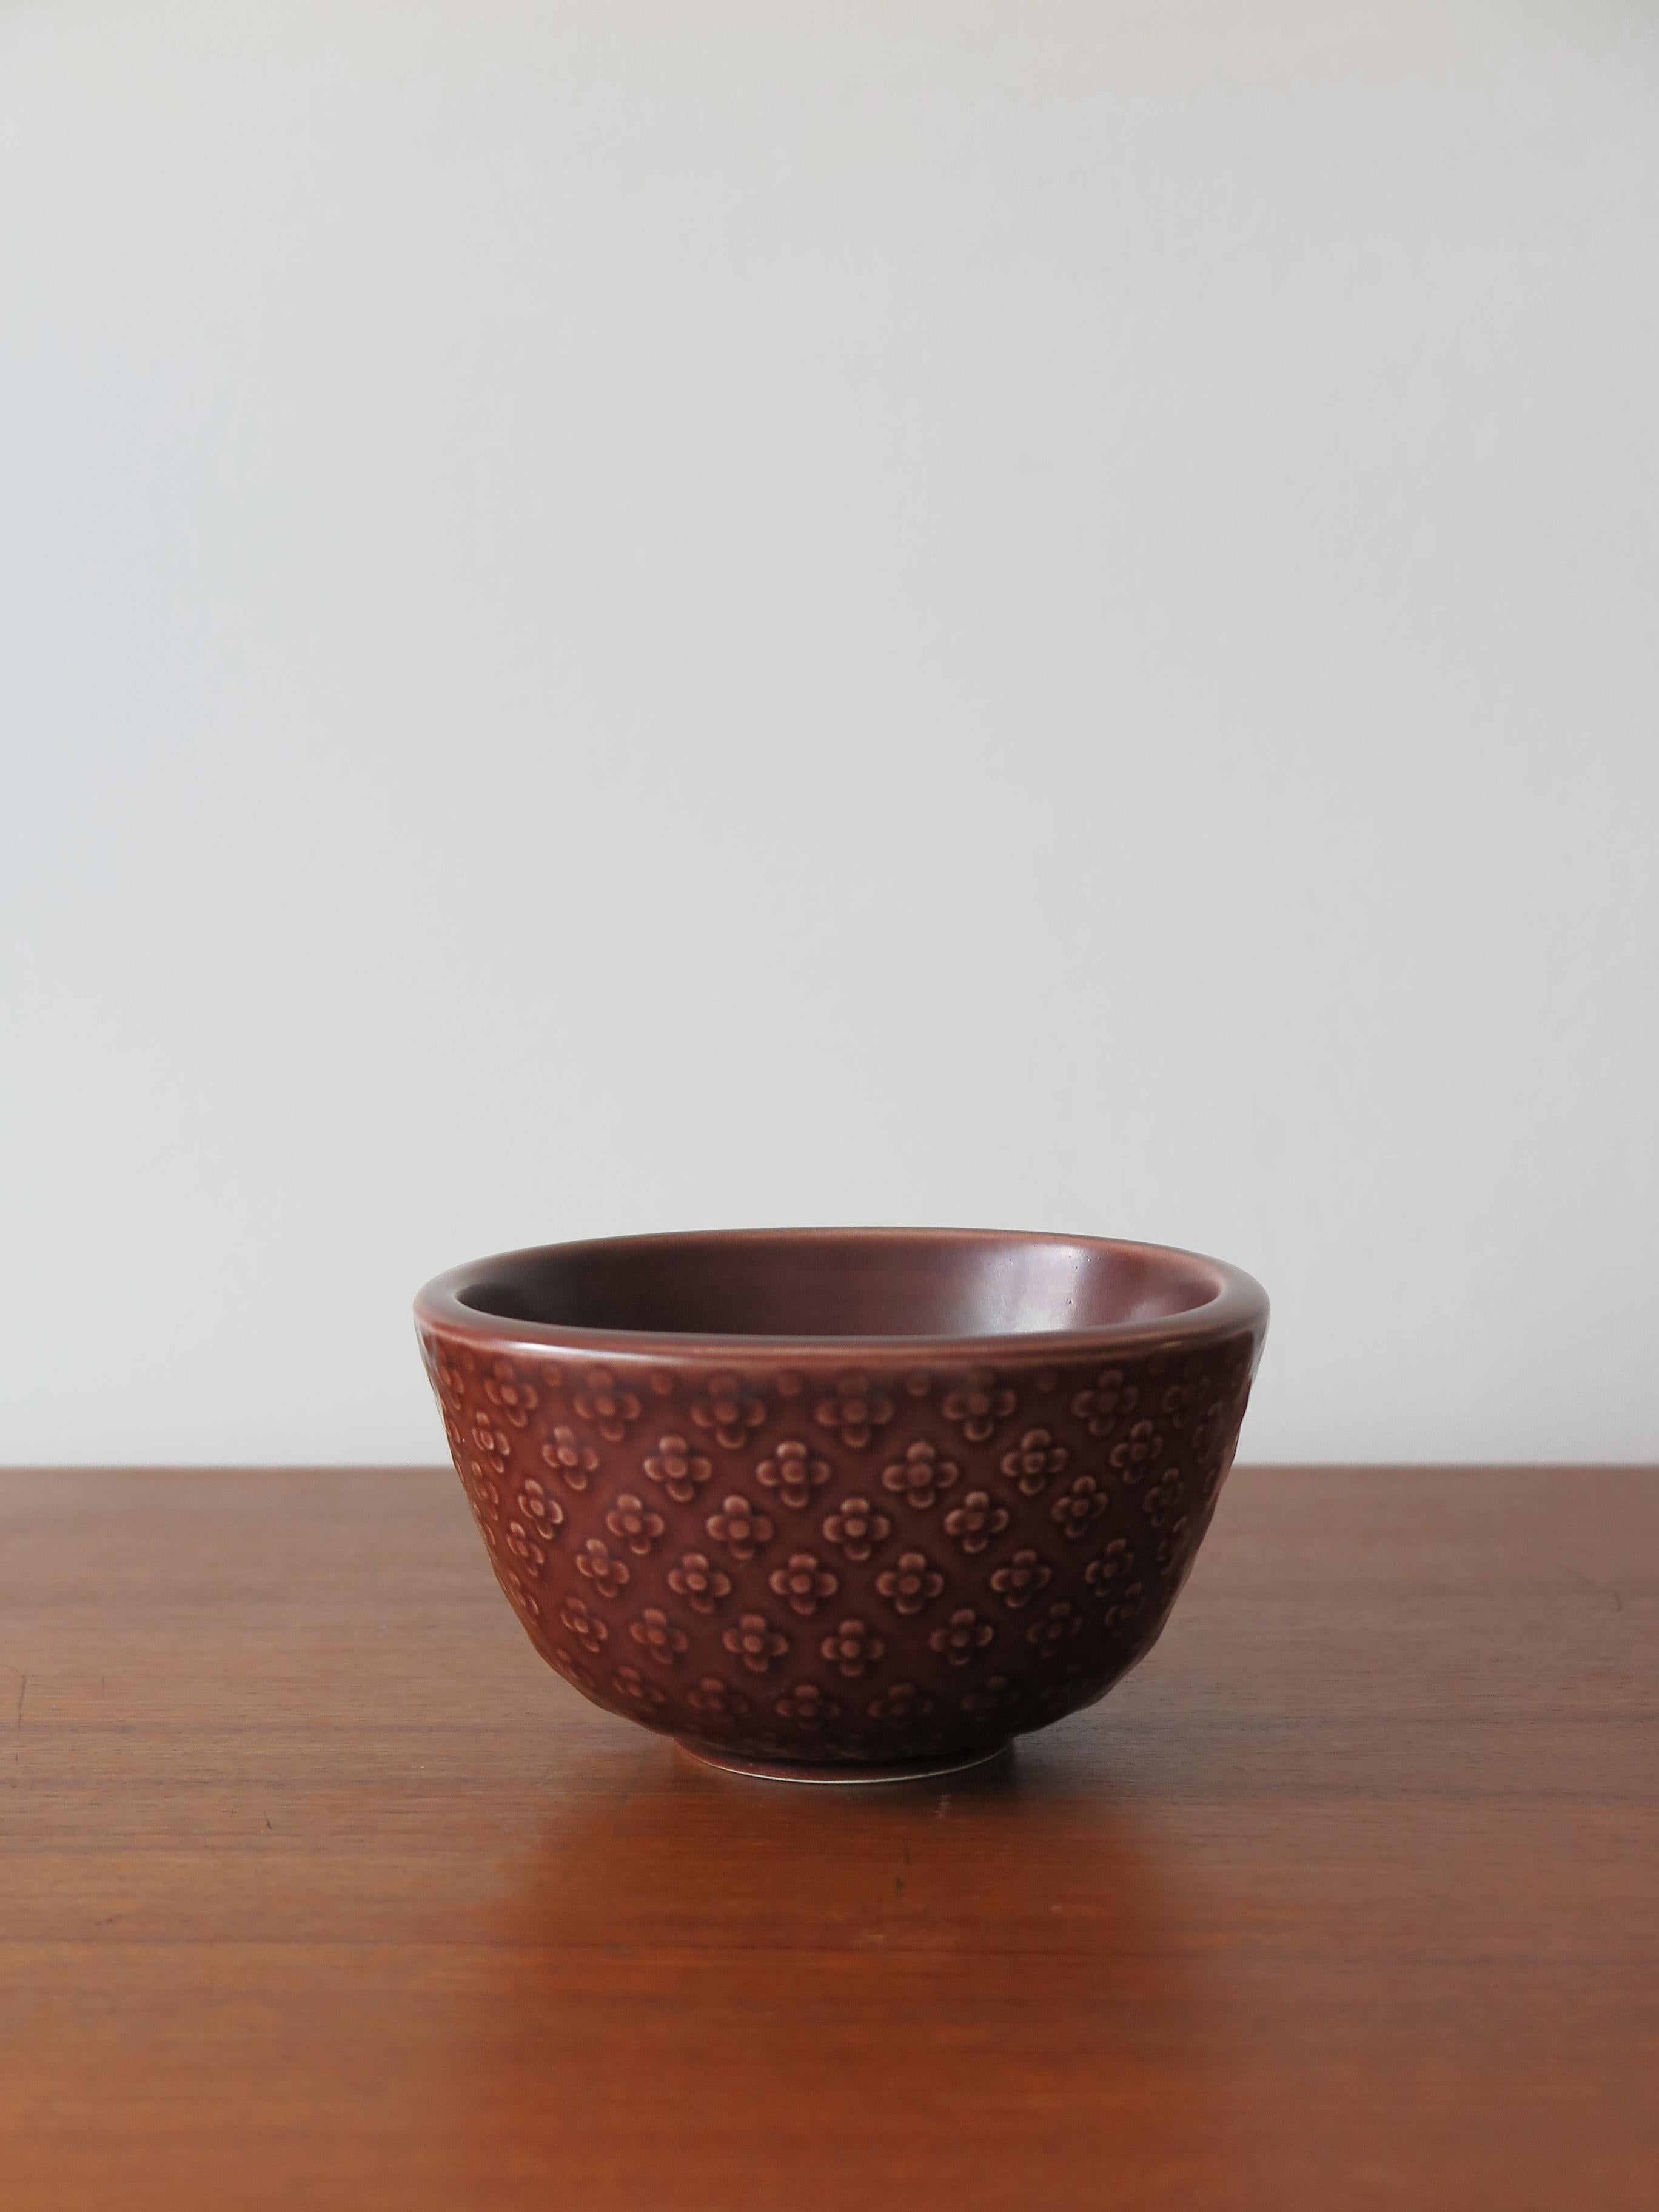 Scandinavian ceramic “Marselis” serie bowl designed by Nils Thorsson for Royal Copenaghen, marked under the base, Denmark 1950s

Please note that the item is original of the period and this shows normal signs of age and use.